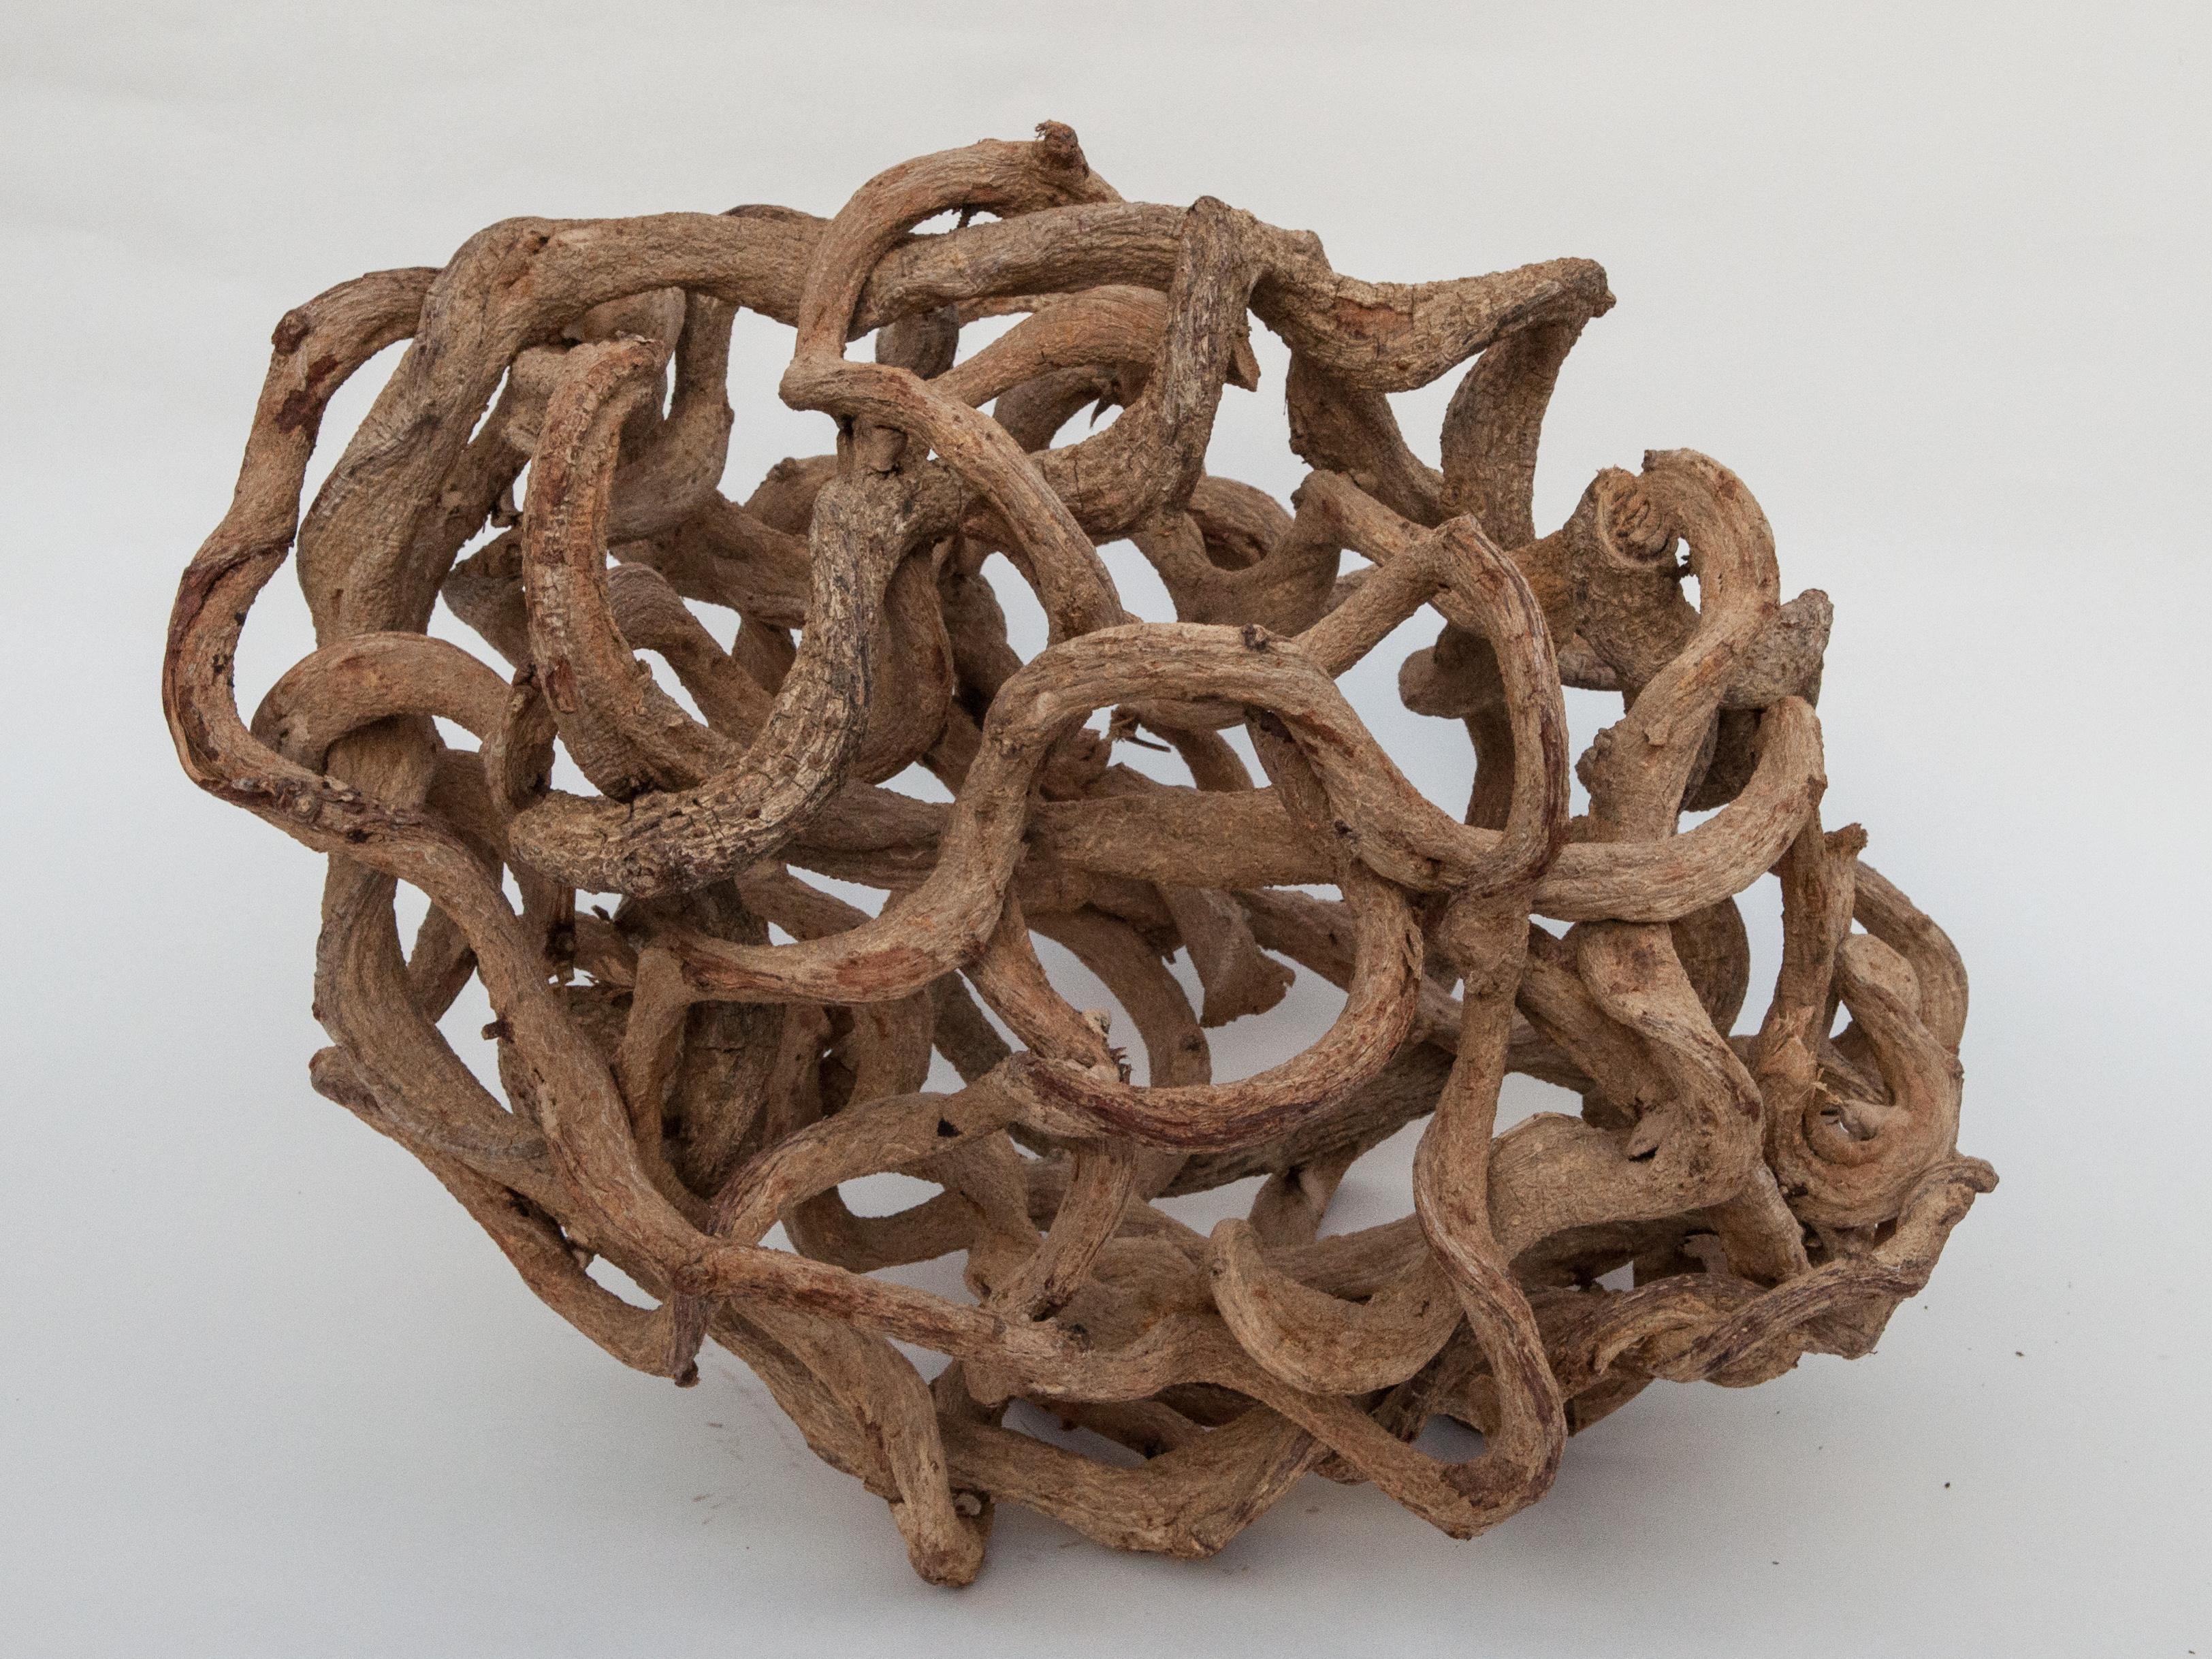 Bleached Liana Vine Organic Sculpture in Ovoid Shape, from Thailand